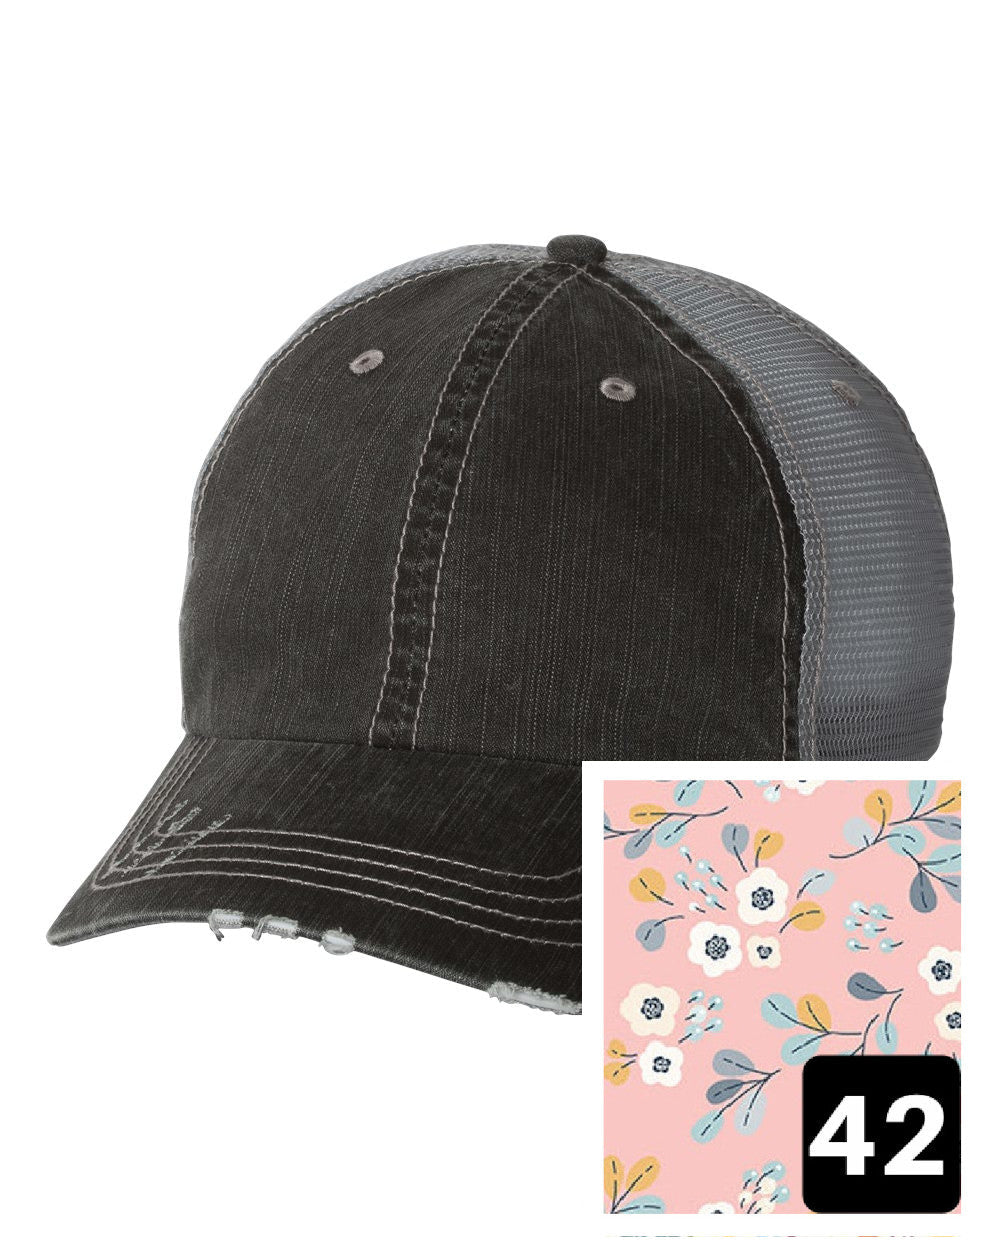 gray distressed trucker hat with light blue and pink mosaic fabric state of Wyoming